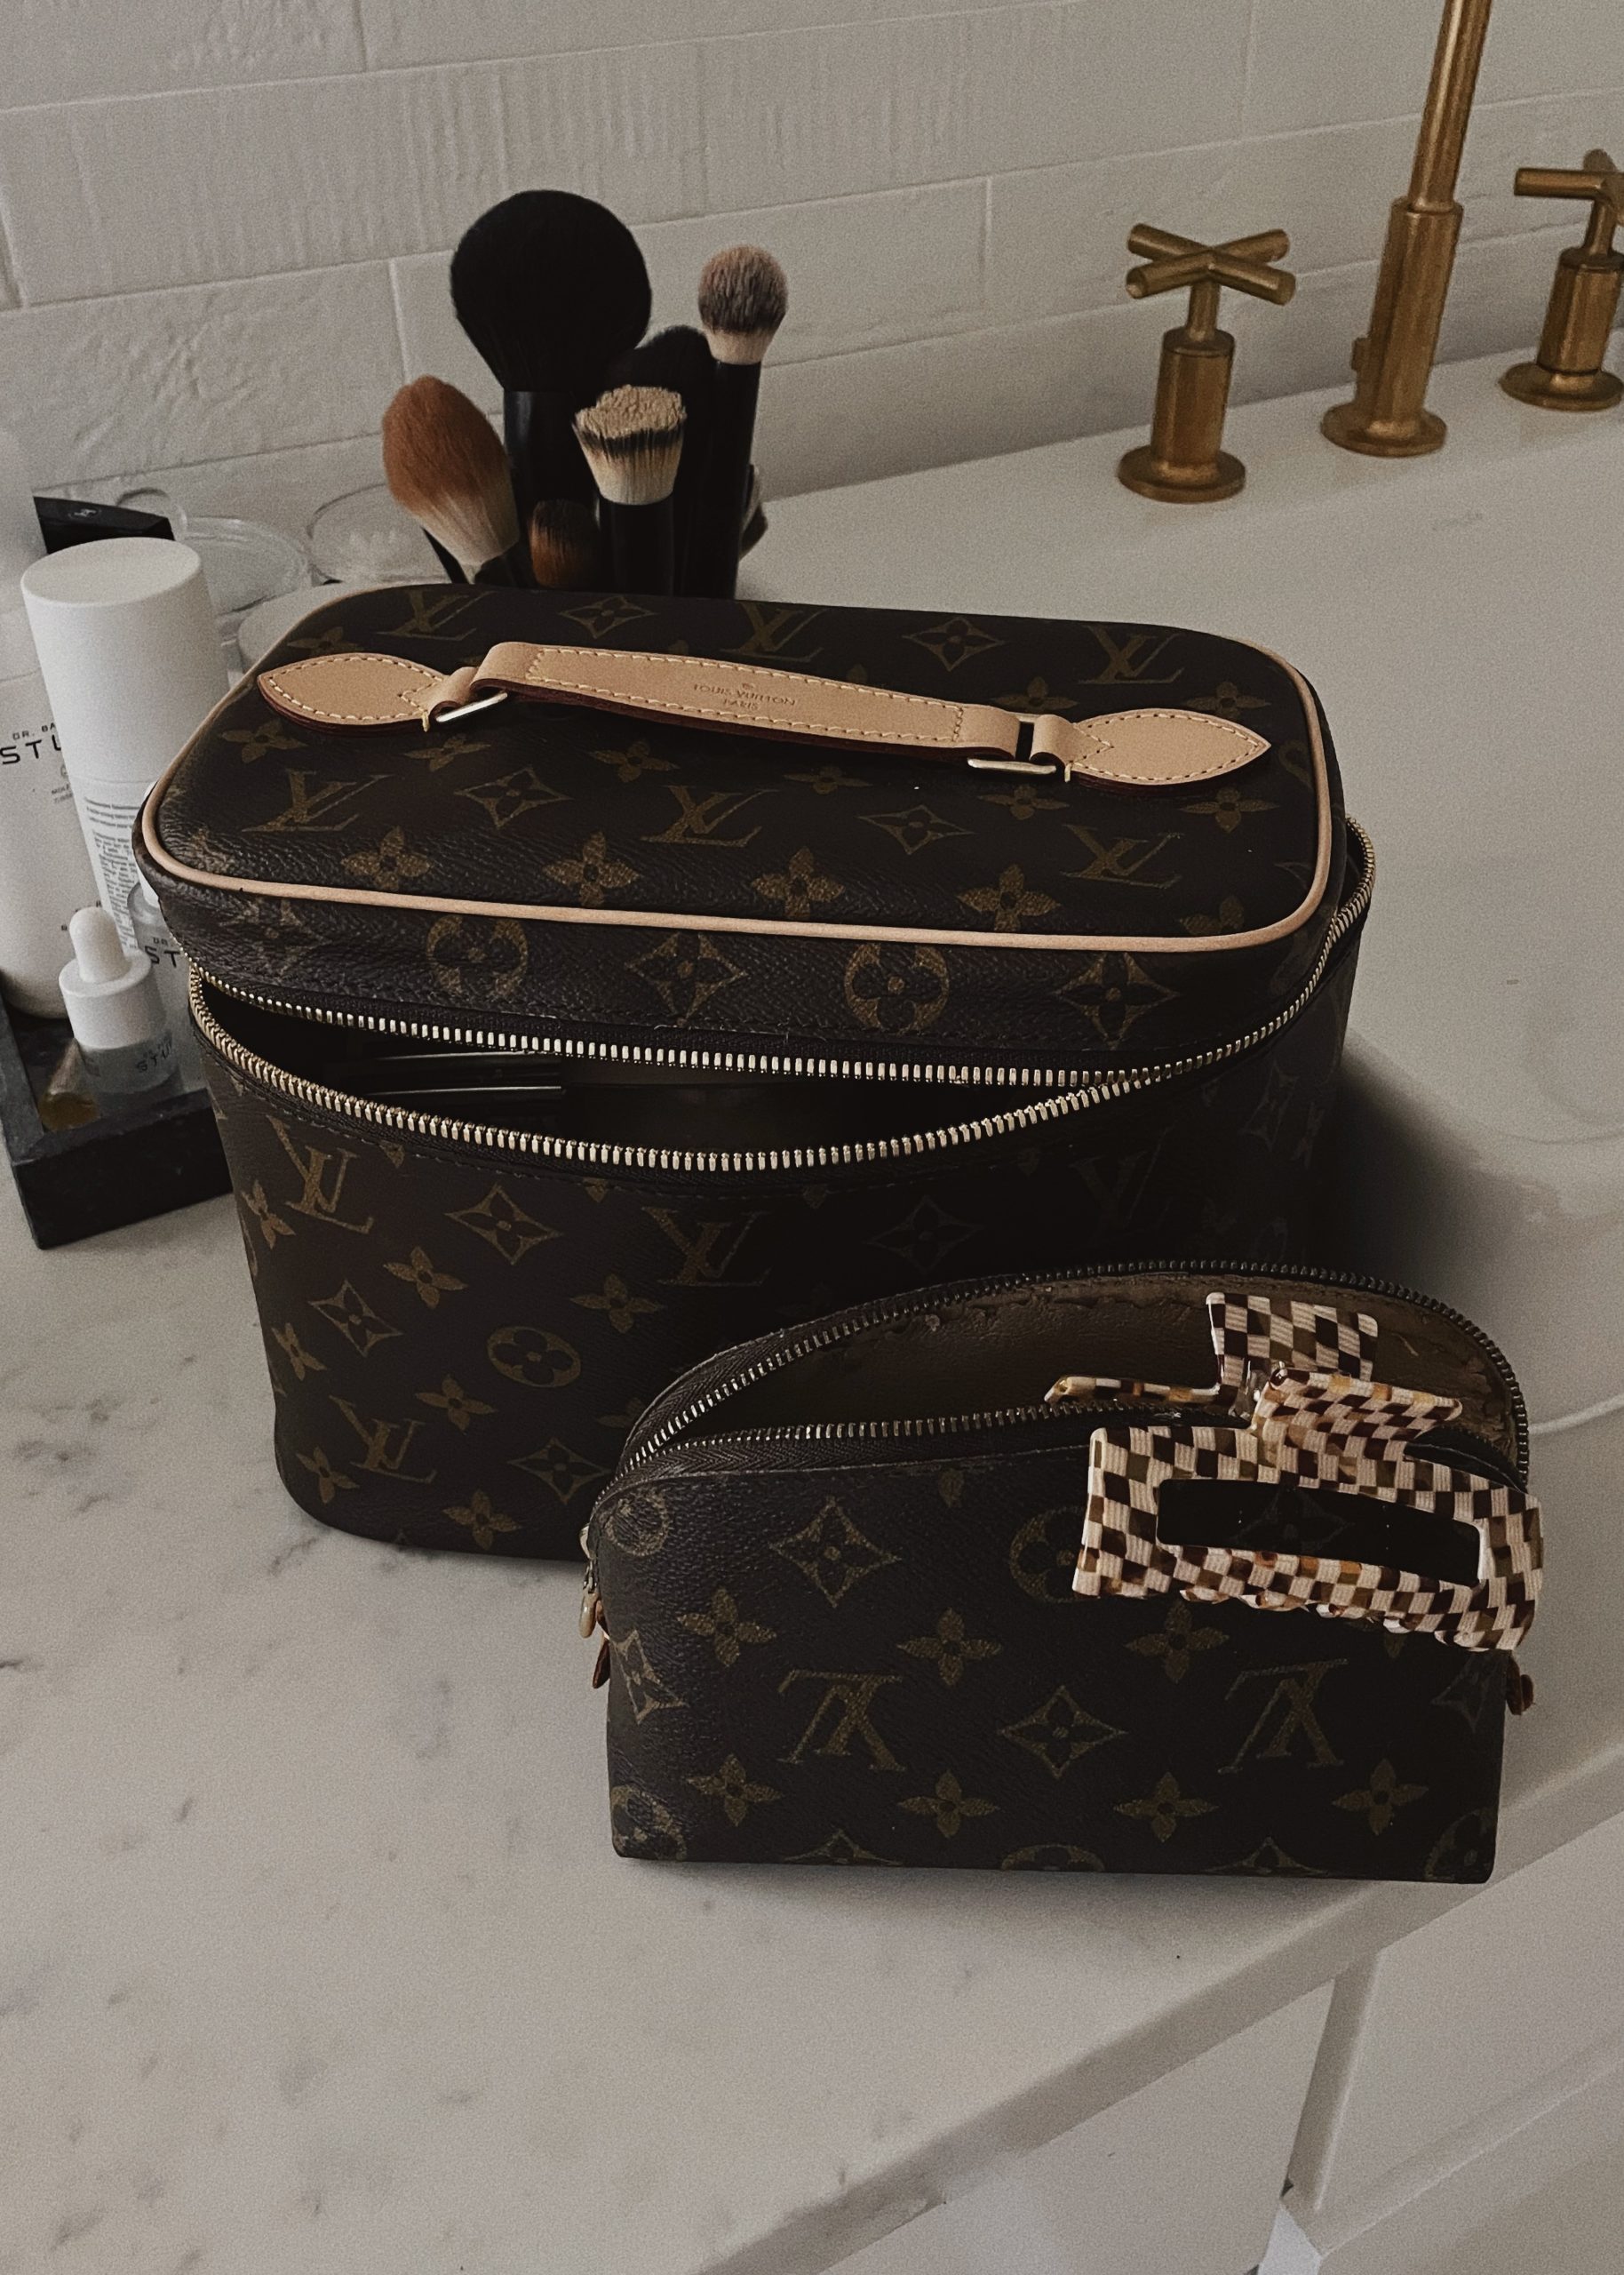 What's in my Louis Vuitton?, Here's what's in my bag.